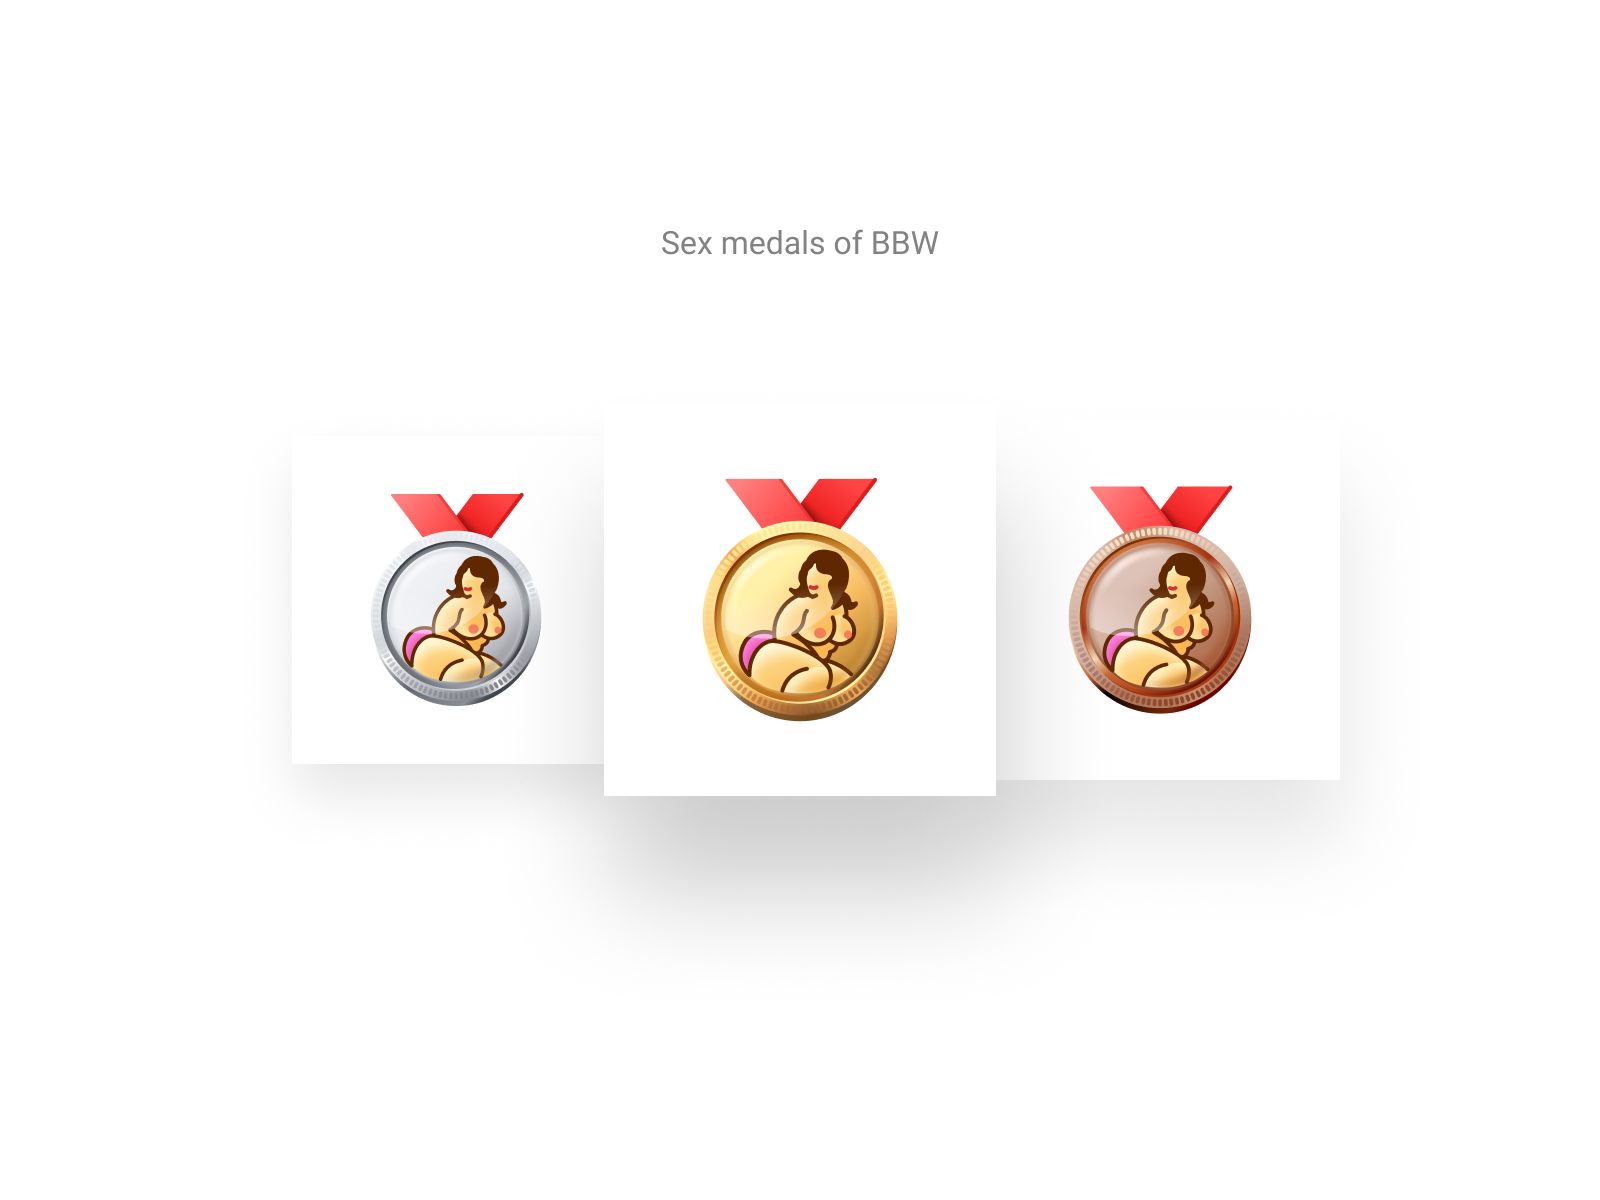 Sex medals of passion #1 badge bbw category icon woman